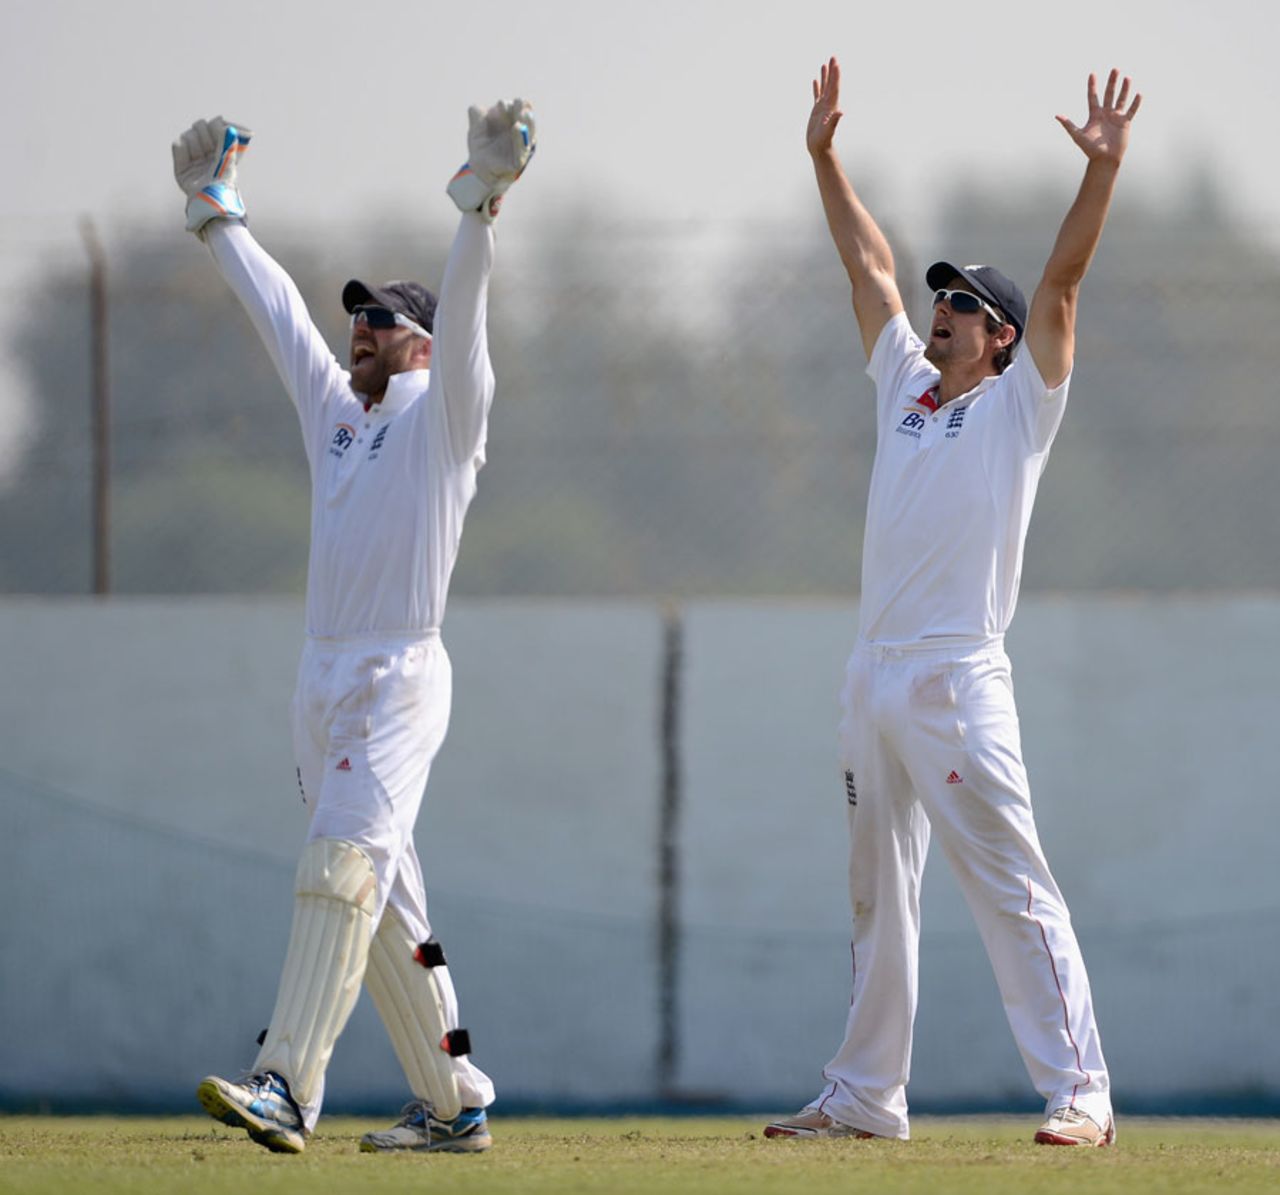 Alastair Cook and Matt Prior go up in appeal, Haryana v England XI, Ahmedabad, 4th day, November 10, 2012